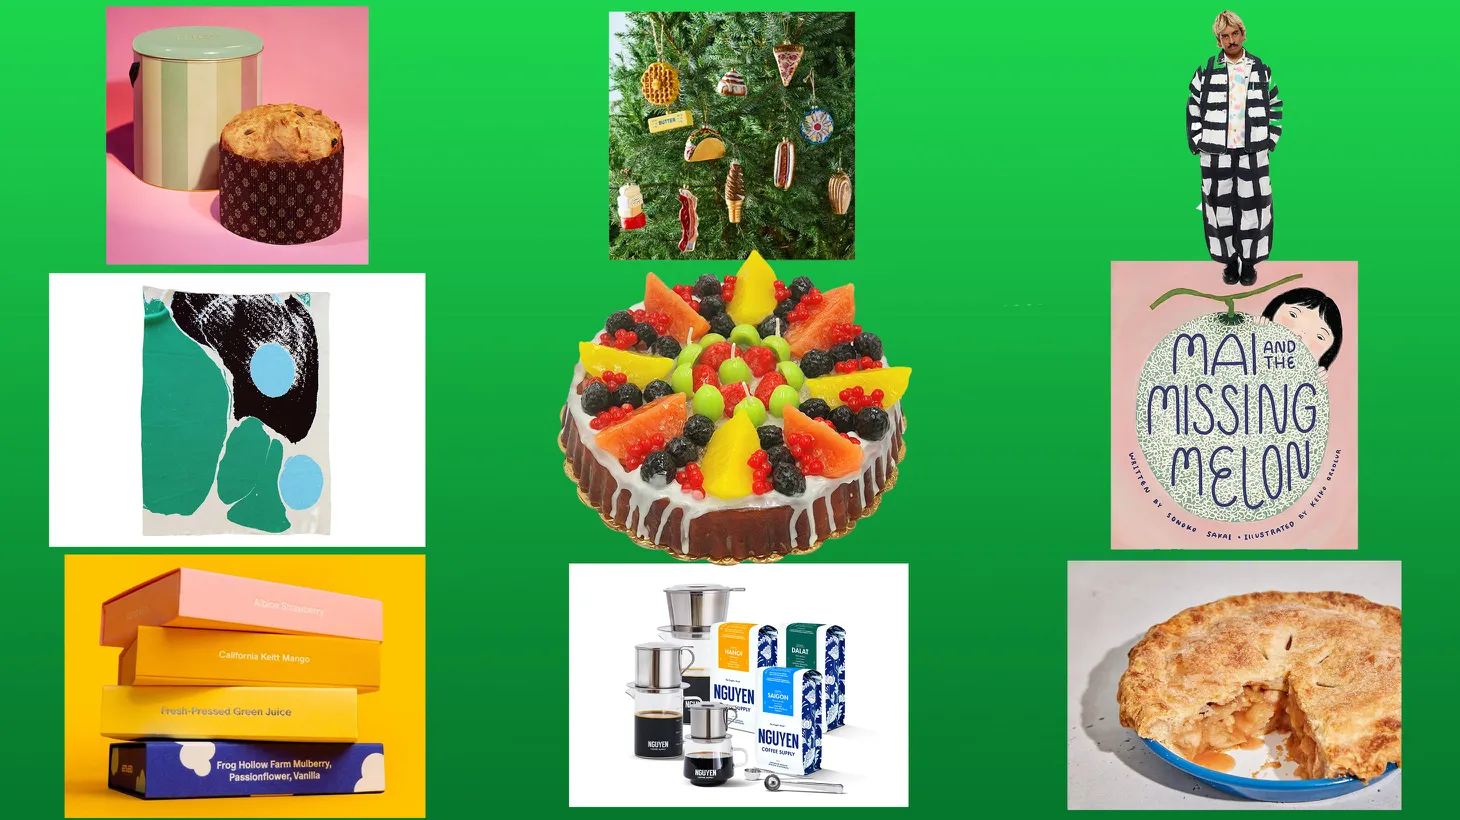 https://www.kcrw.com/culture/shows/good-food/good-food-holiday-gift-guide-evan-kleiman-christmas-2023/@@images/image/page-header?v=1701106101.69